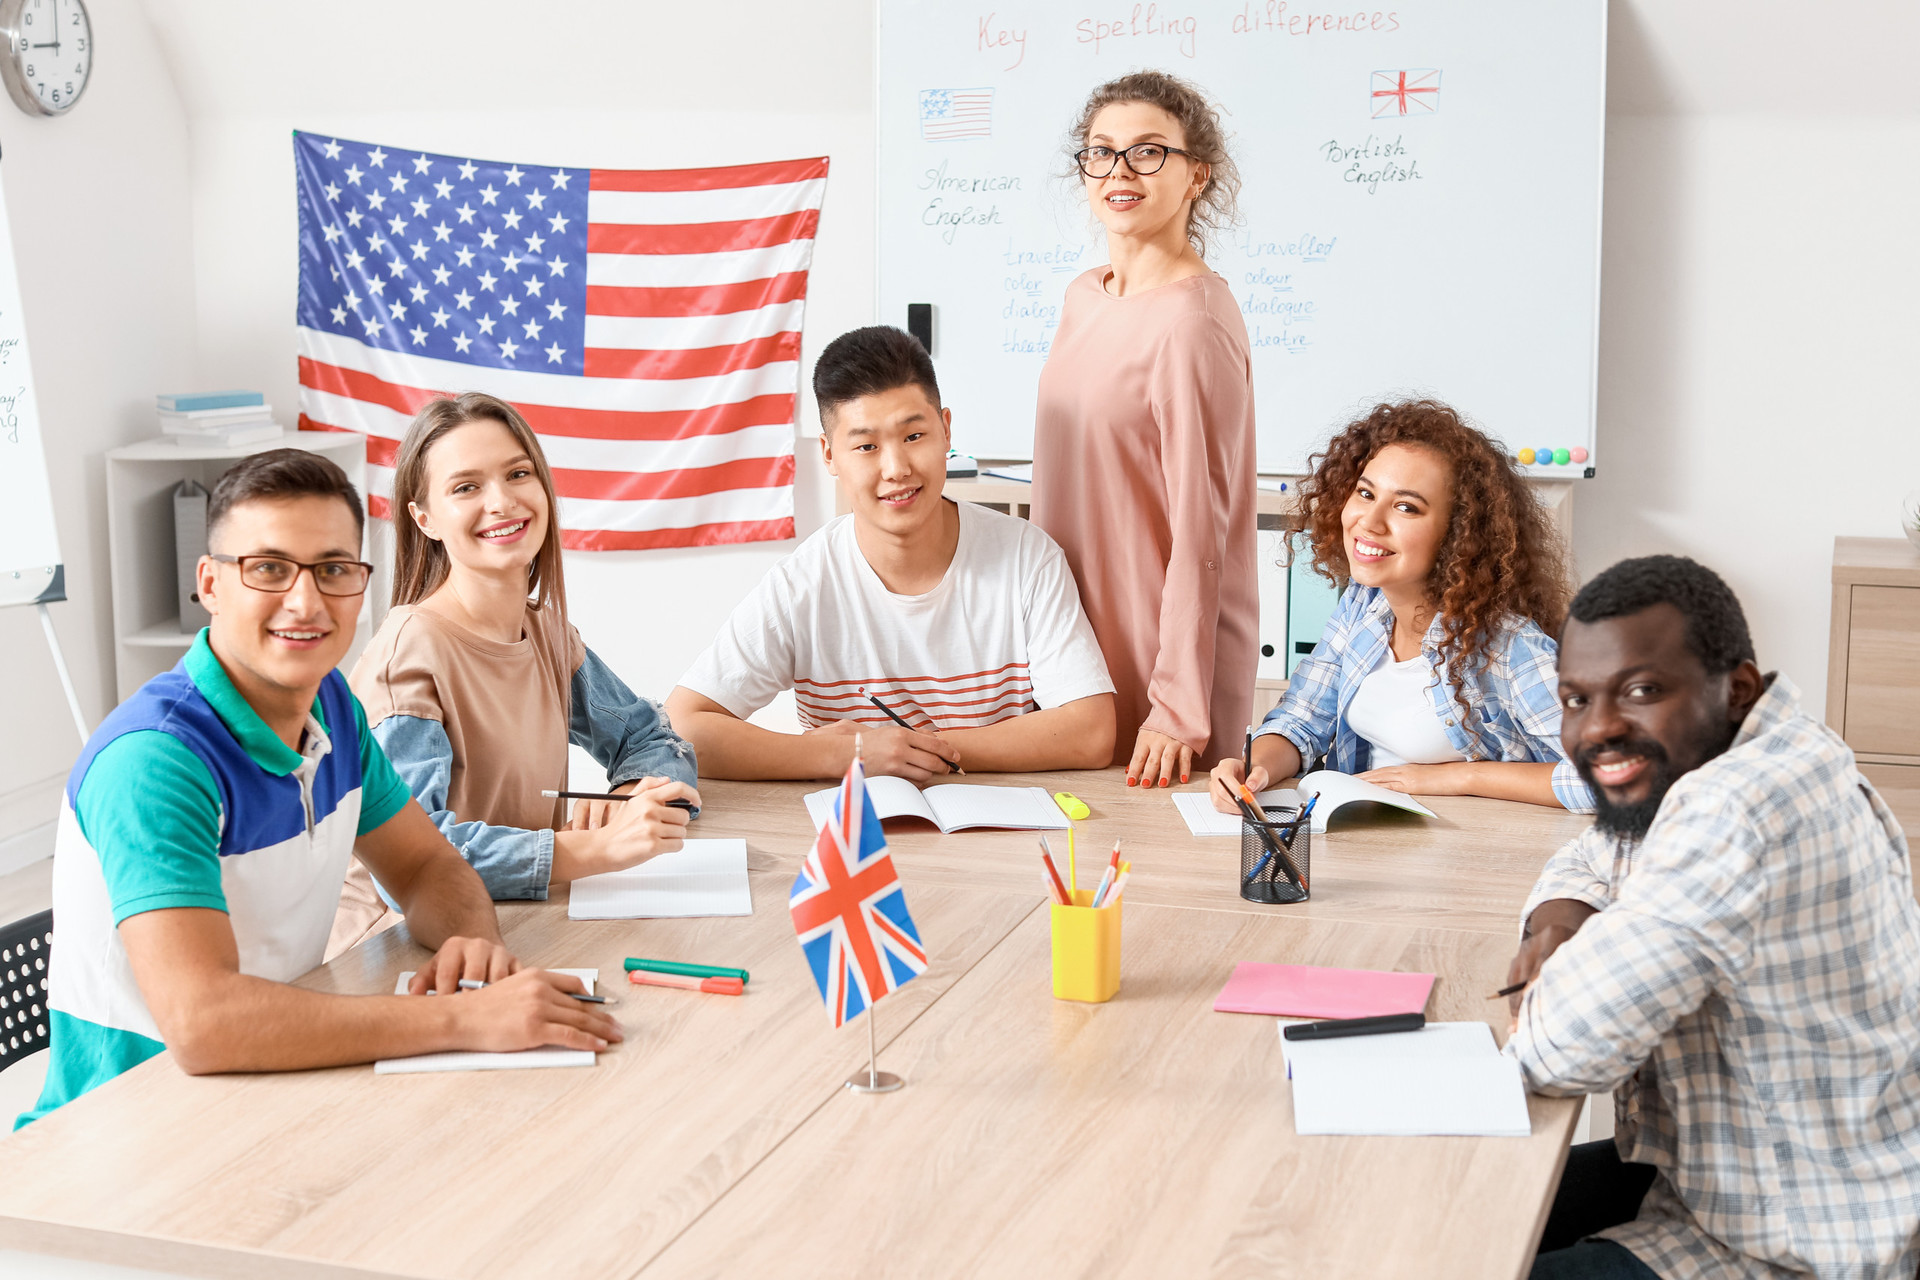 Students of various ethnic backgrounds sit around a table in front of an American flag